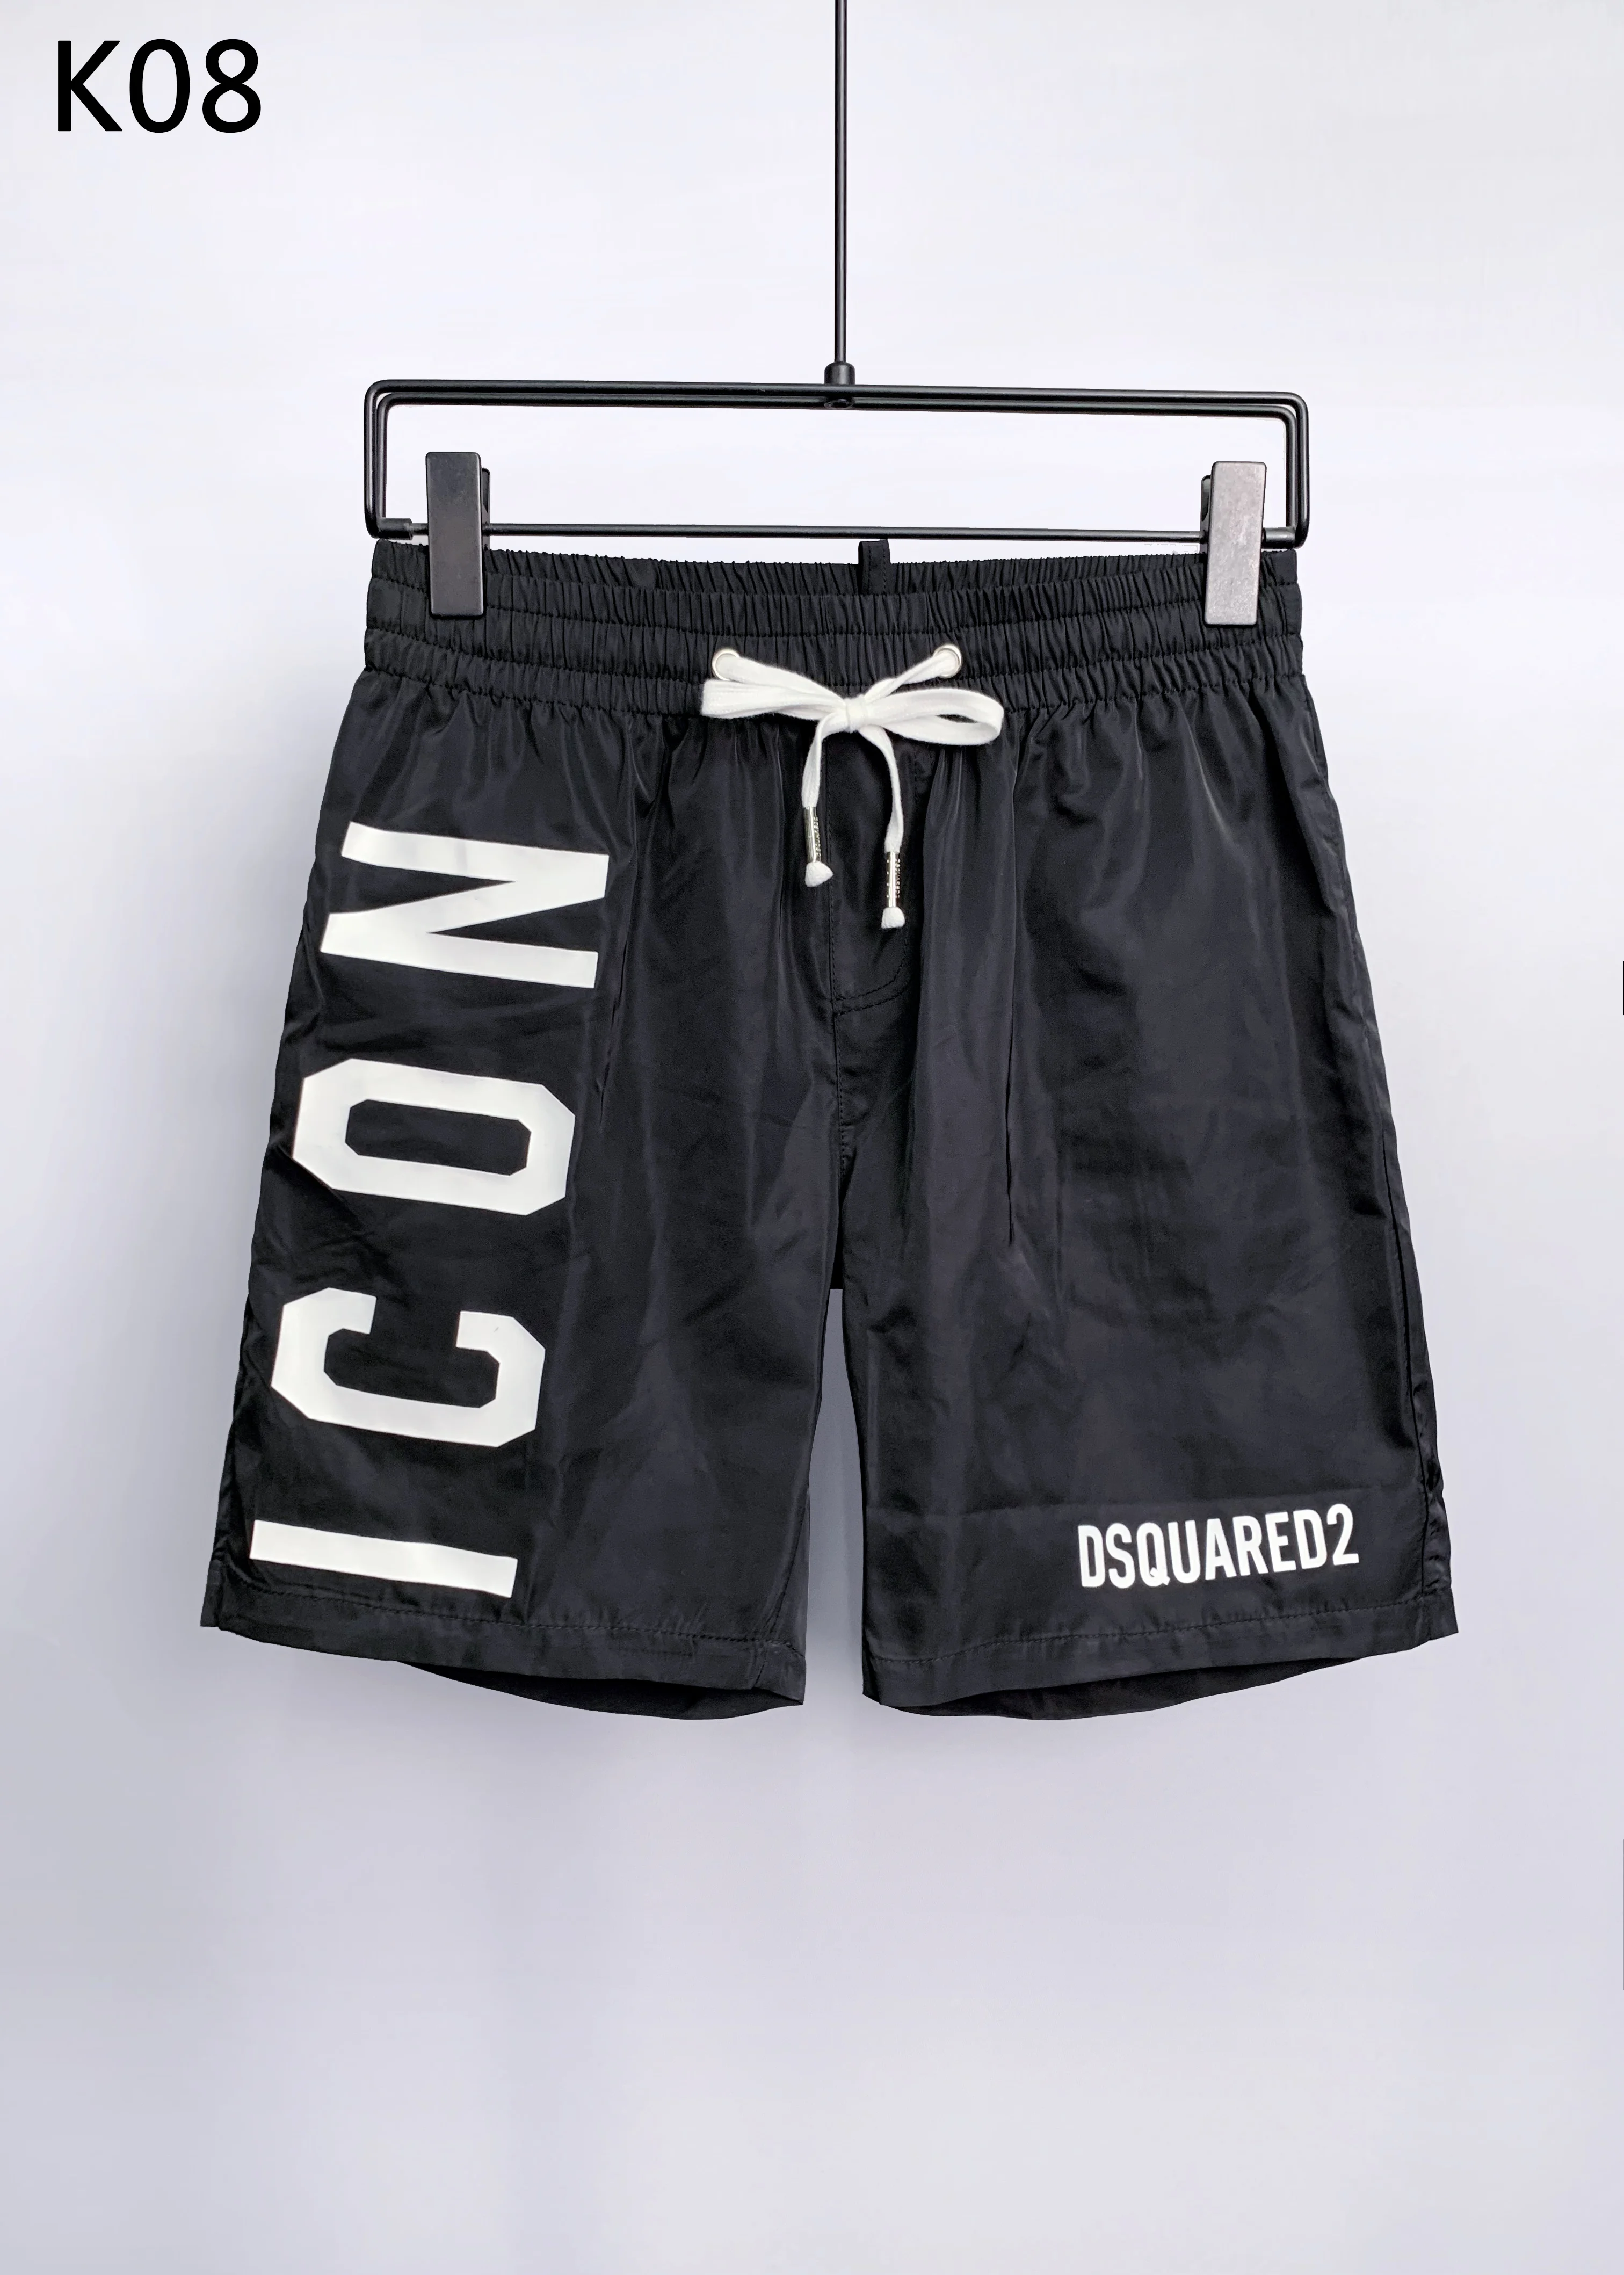 

2022 Classic Dsquared2 ICON Letter Printed Beach Shorts Women/Men Running Black Matching Surfing Pants Male Swimsuits OutWear